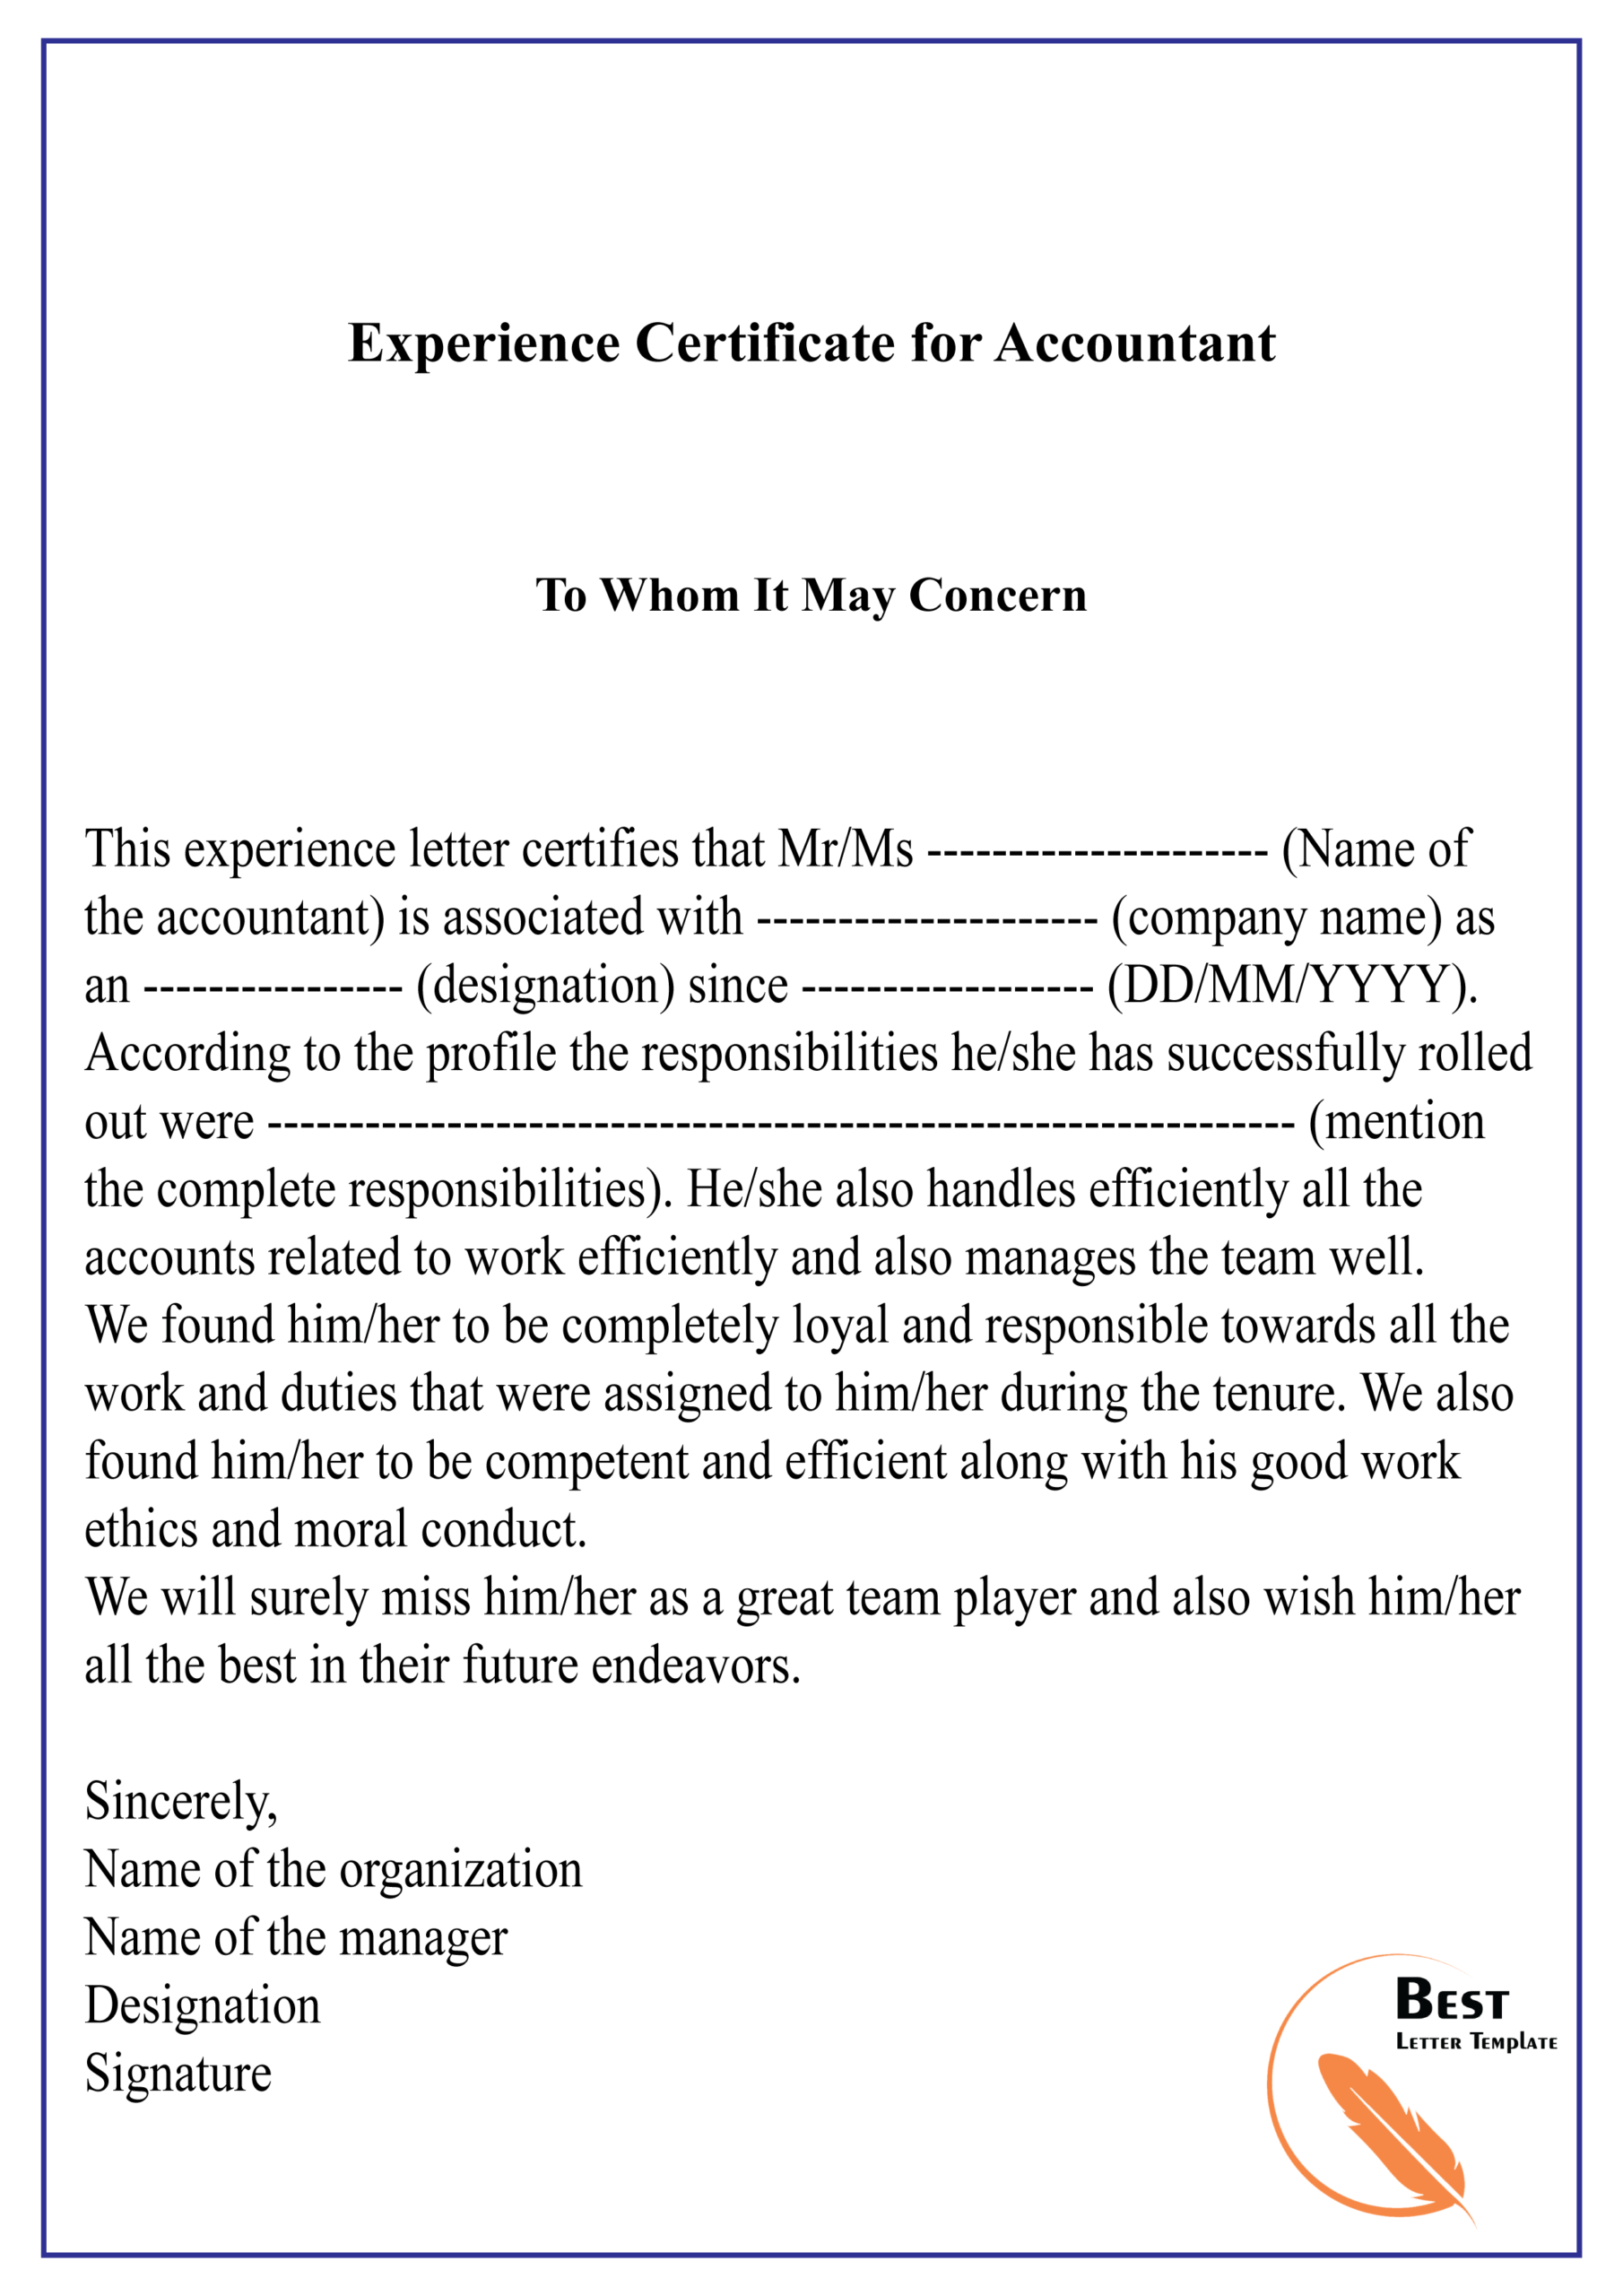 Experience Certificate For Accountant 01 | Best Letter Template Inside Template Of Experience Certificate